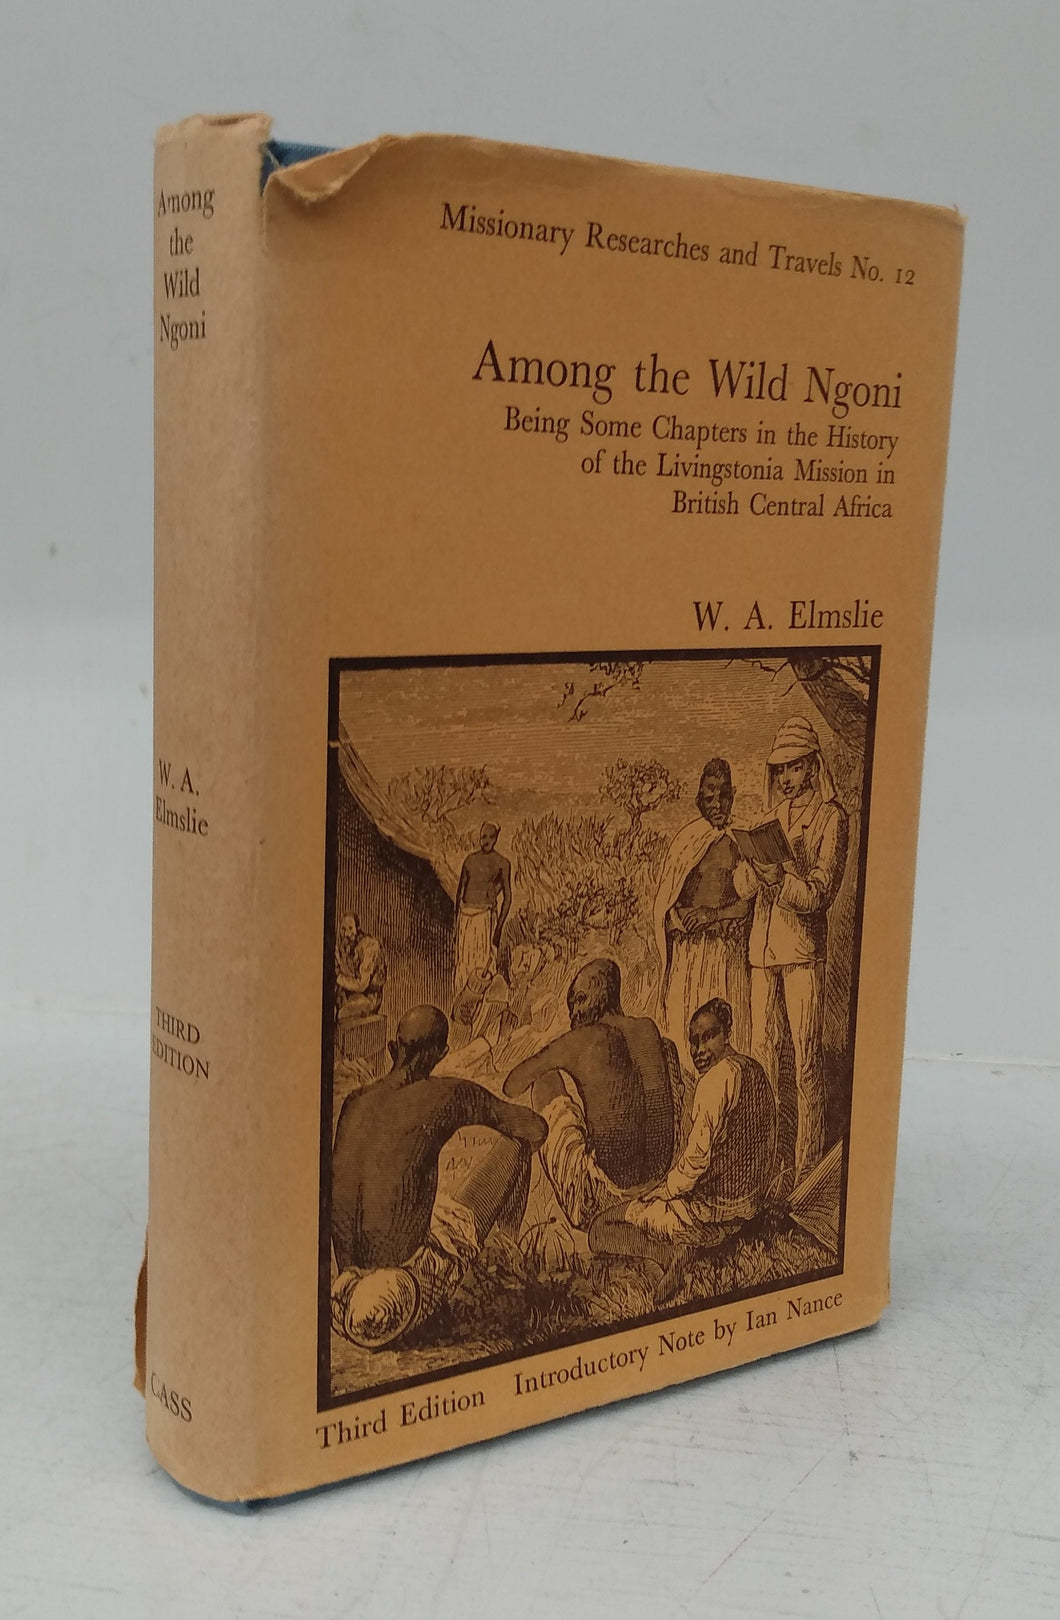 Among The Wild Ngoni: Being Some Chapters in the History of the Livingstonia Mission in British Central Africa